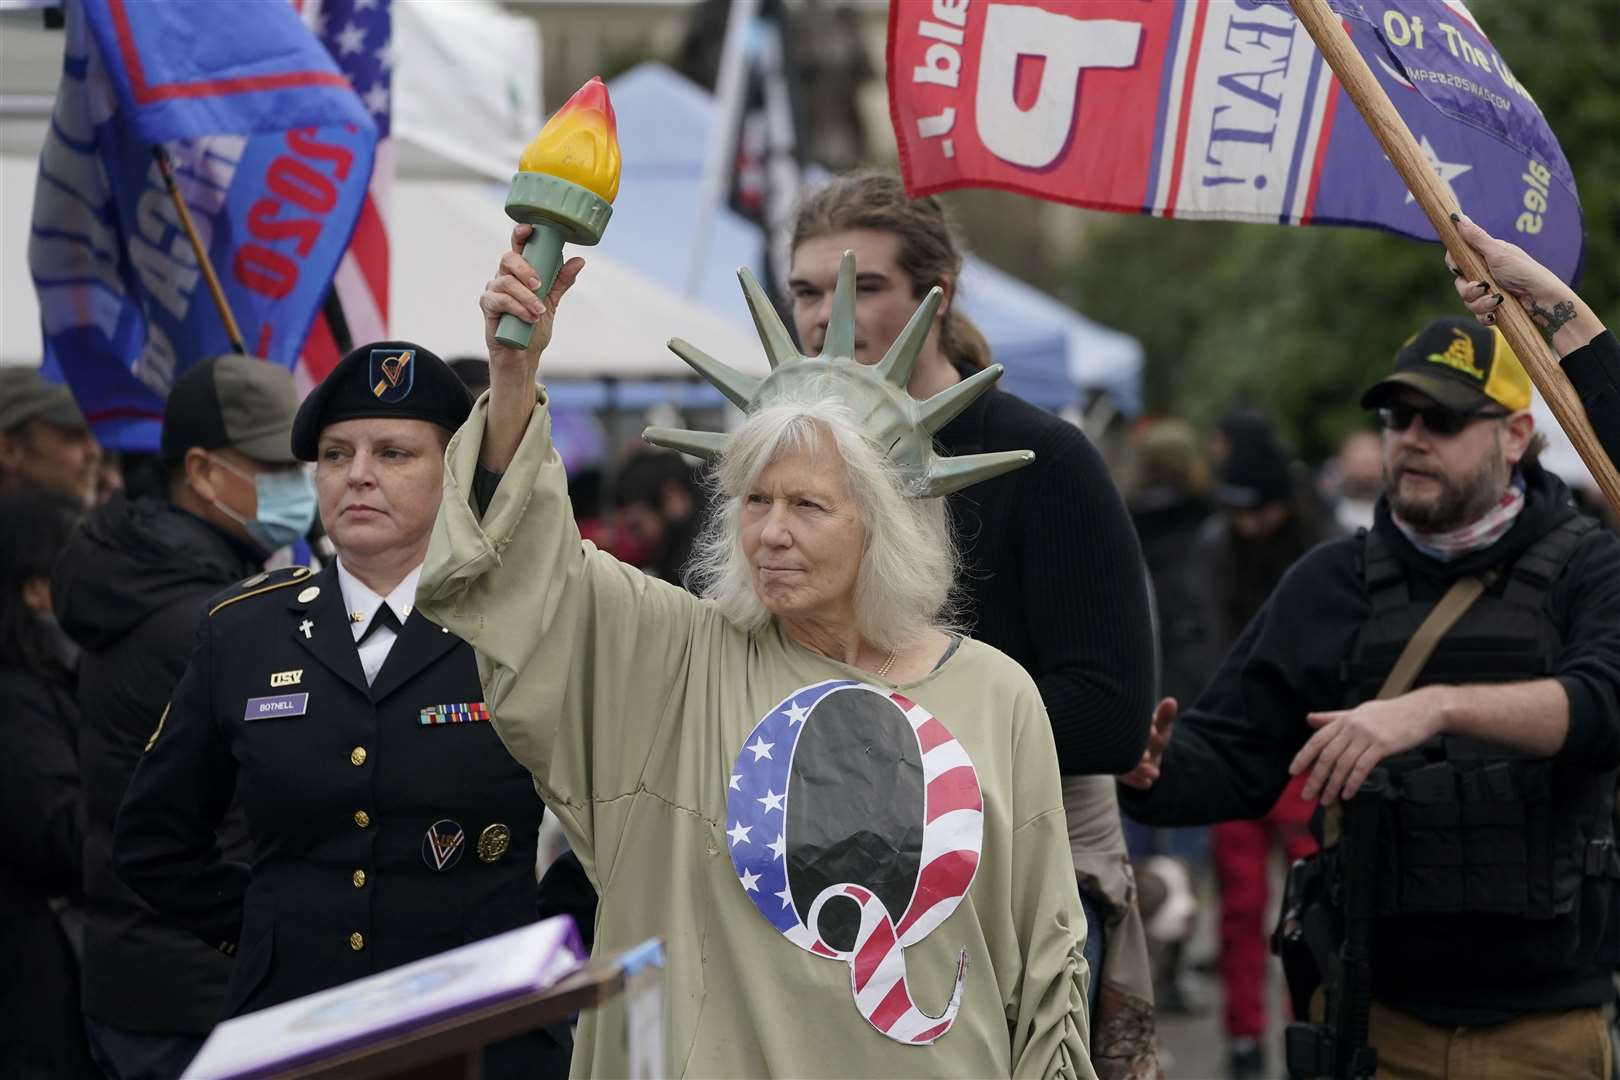 A demonstrator dressed as Lady Liberty wears a shirt with the letter Q, referring to QAnon outside the Capitol building (Ted S. Warren/AP)